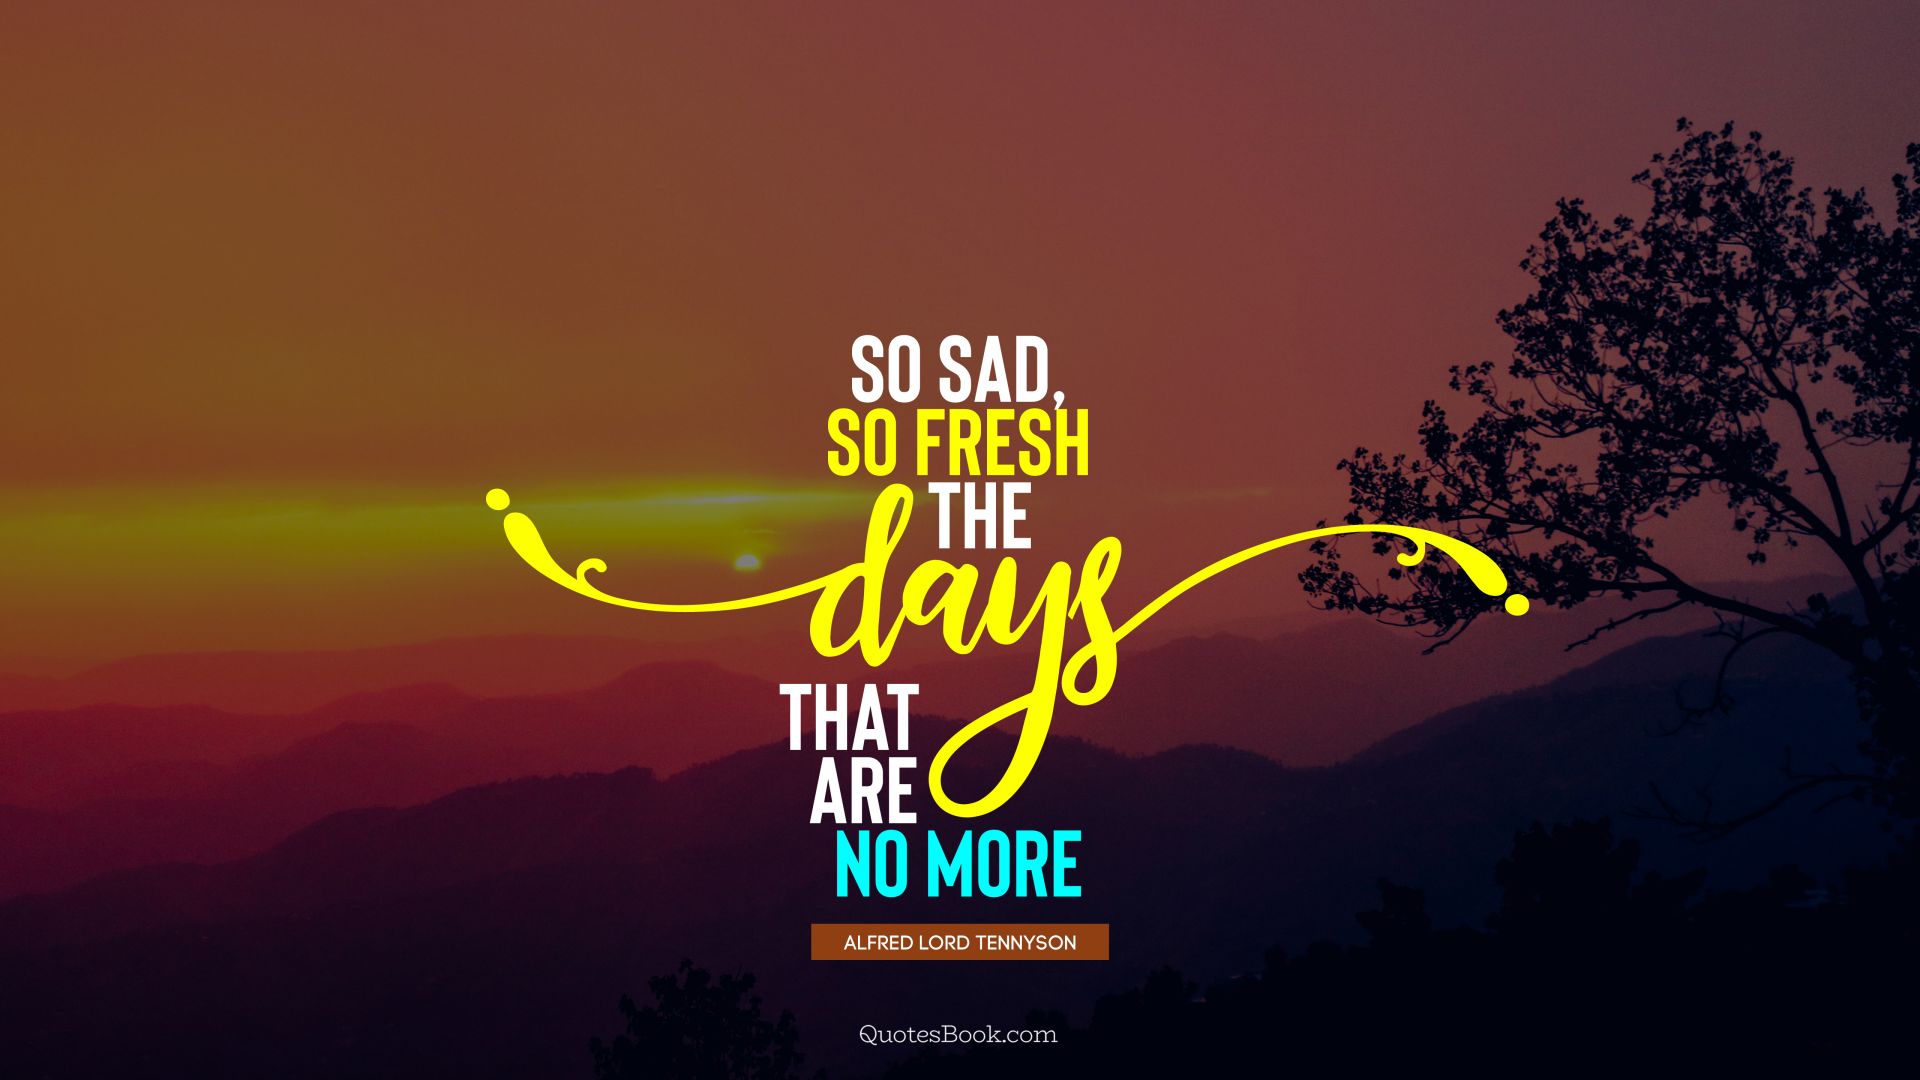 So sad, so fresh the days that are no more. - Quote by Alfred Lord Tennyson